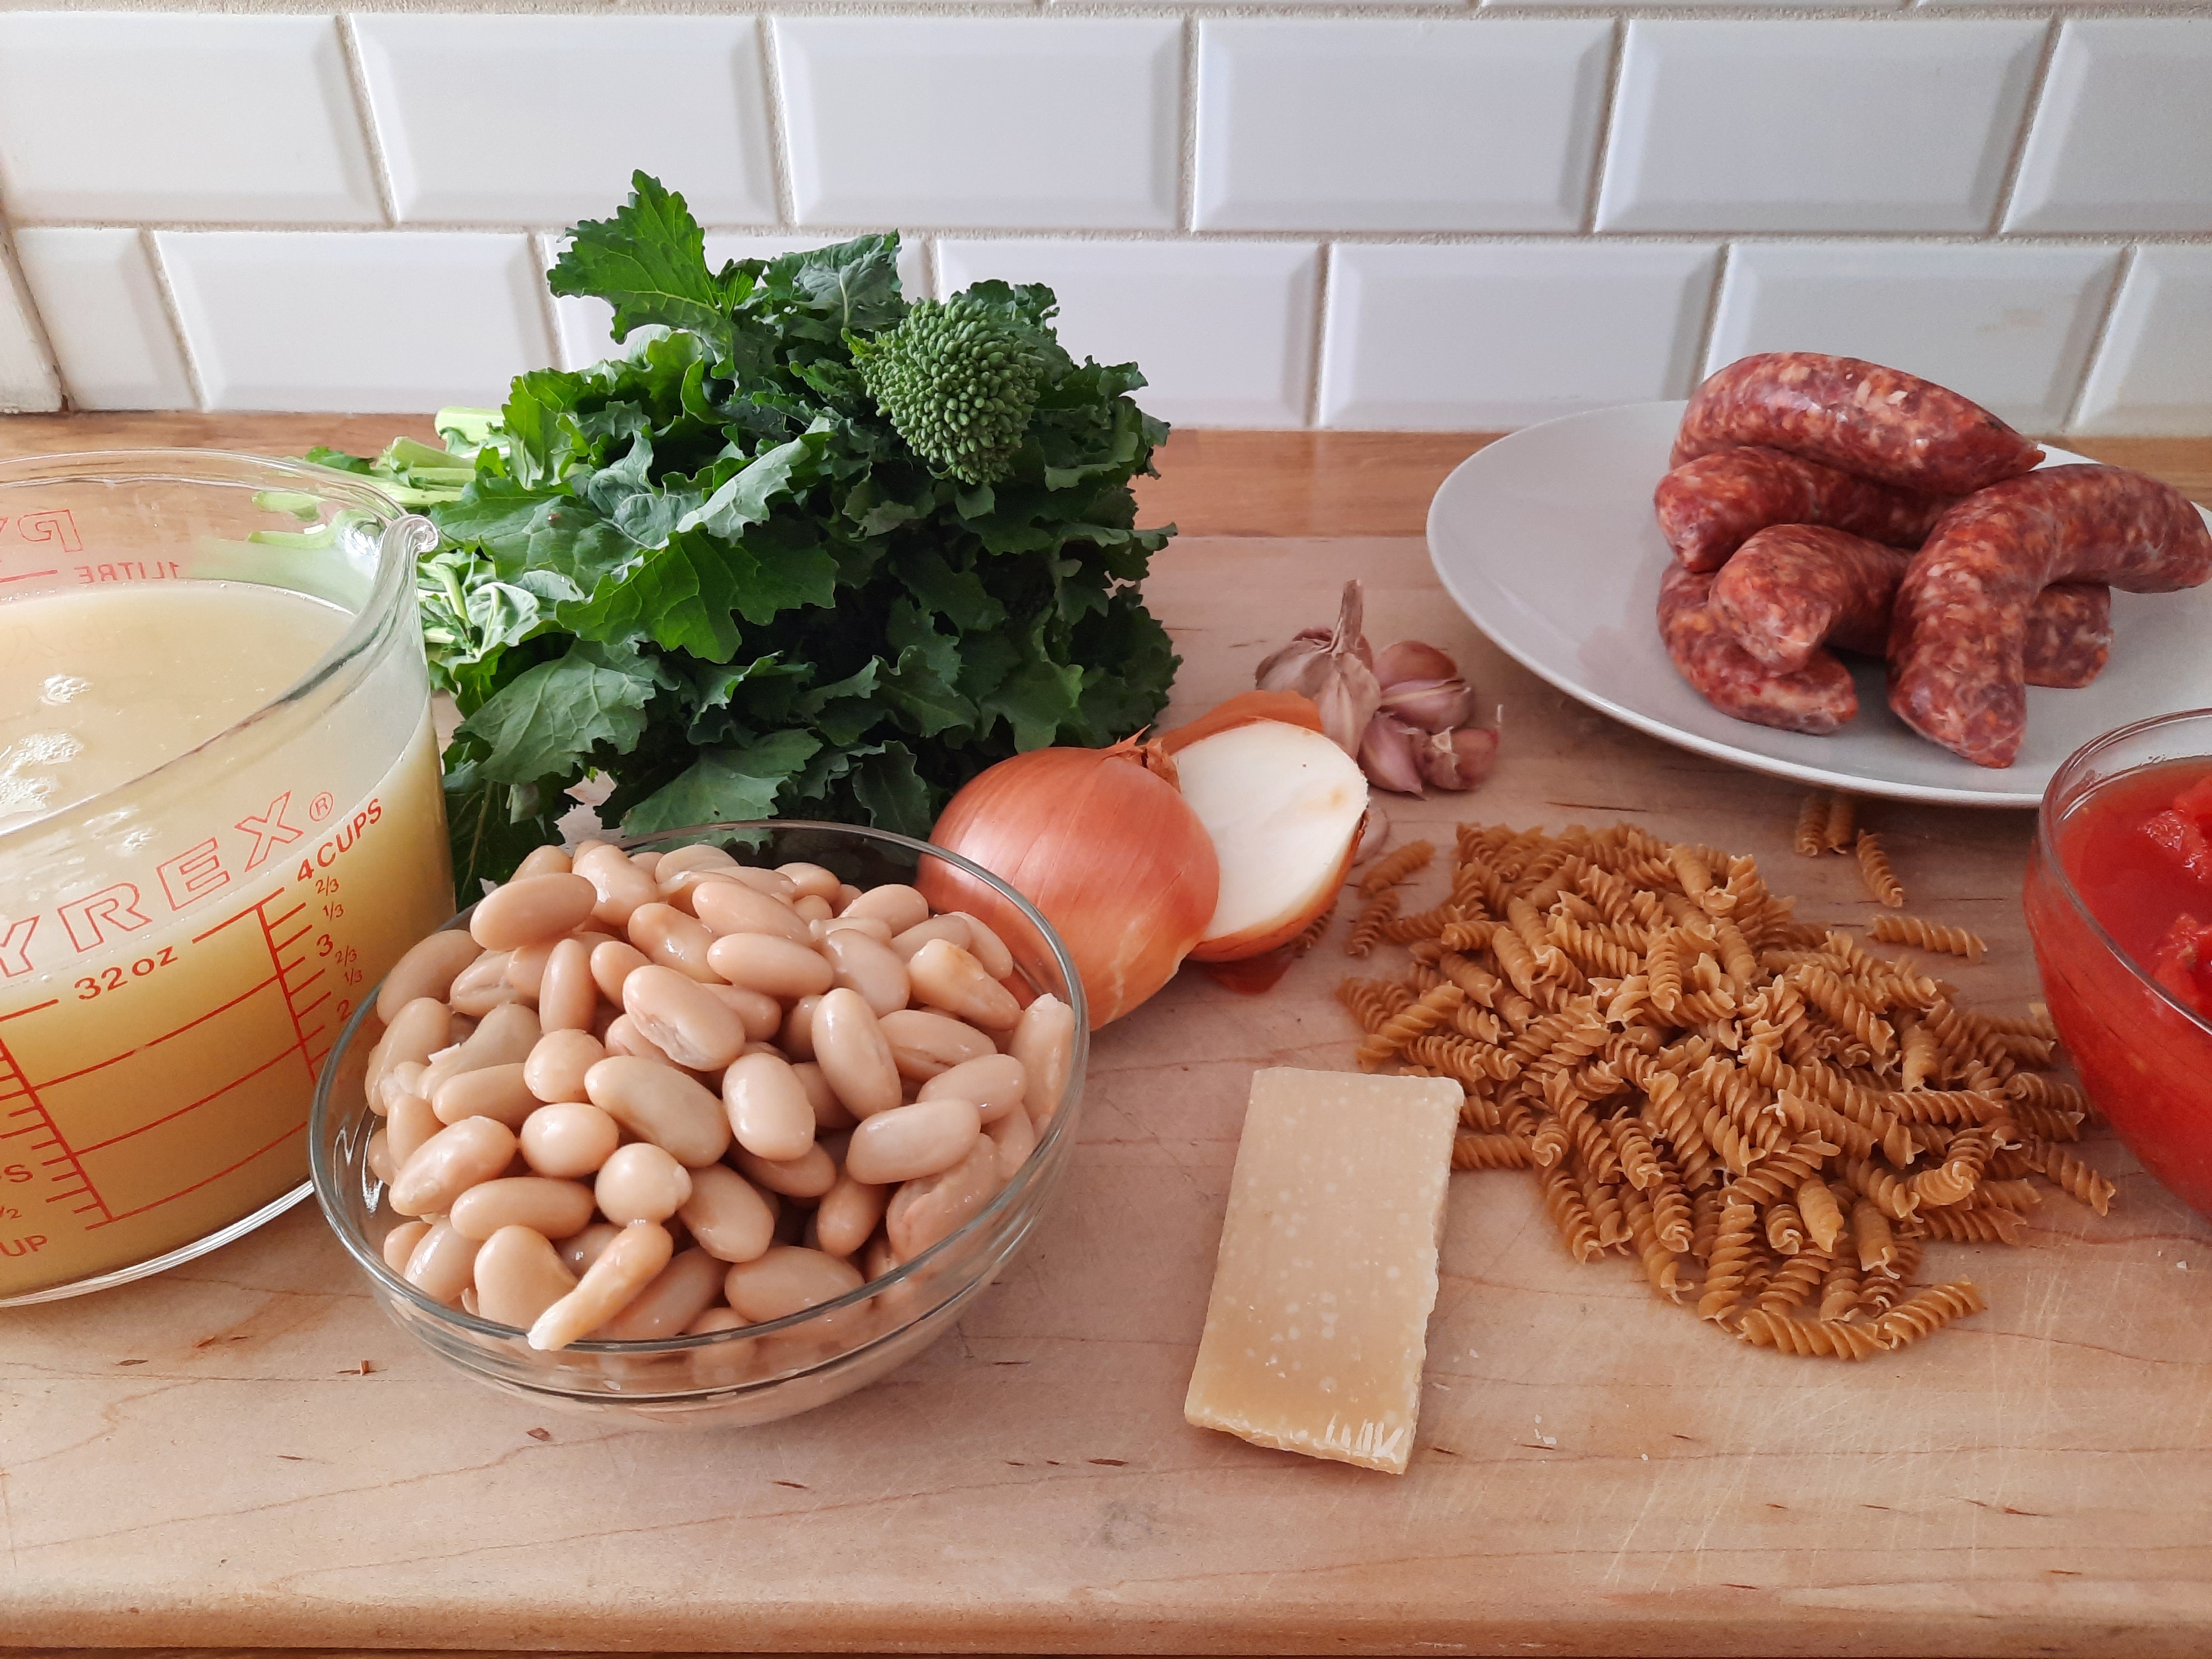 ingredients for soup on a cutting board, including beans, rapini, sausage, pasta, broth